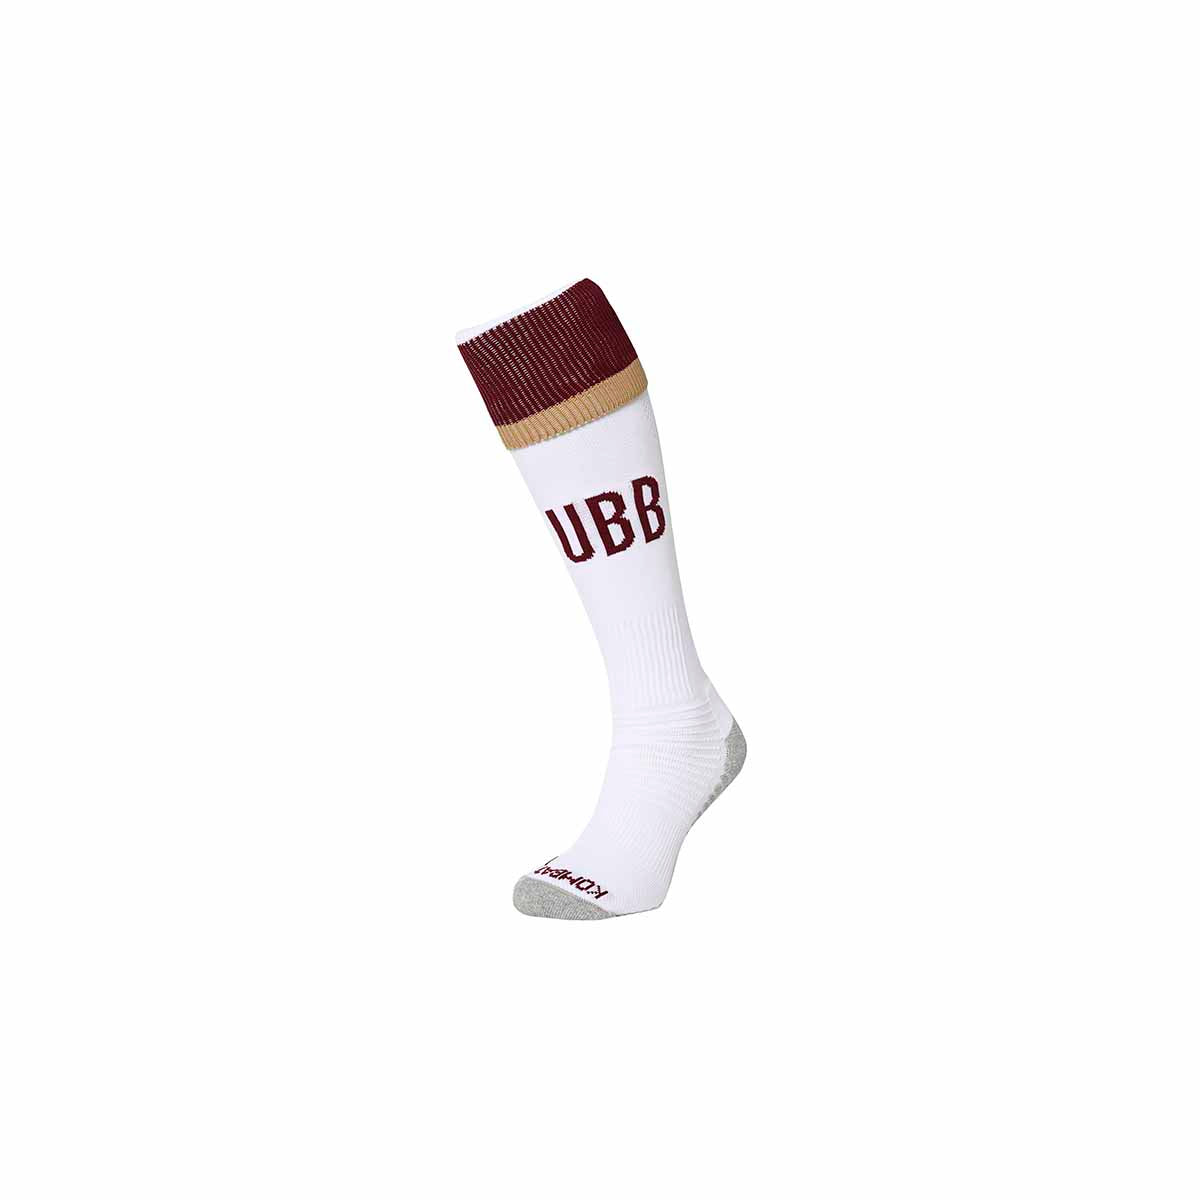 Calcetines Kombat Spark Pro UBB Rugby 22/23 Blanco Hombre